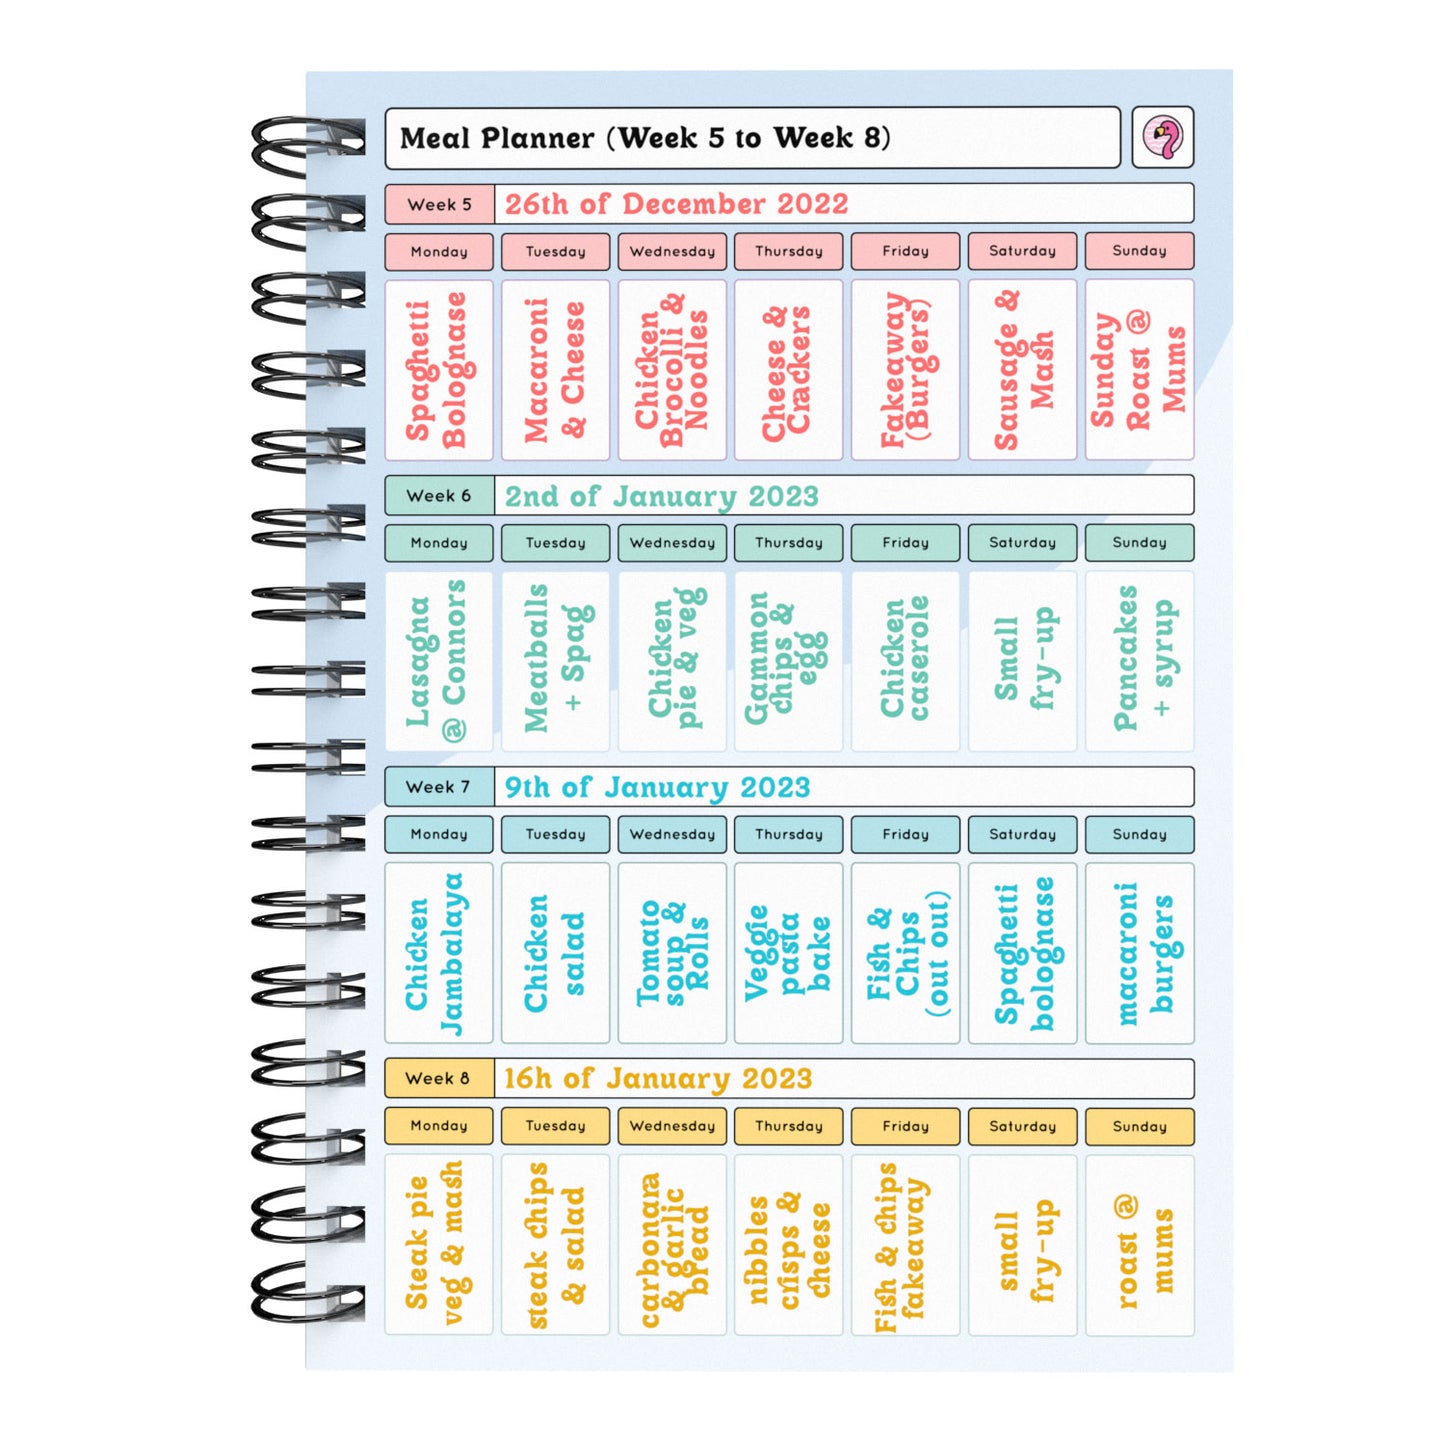 Food Diary - C41 - Calorie Counting